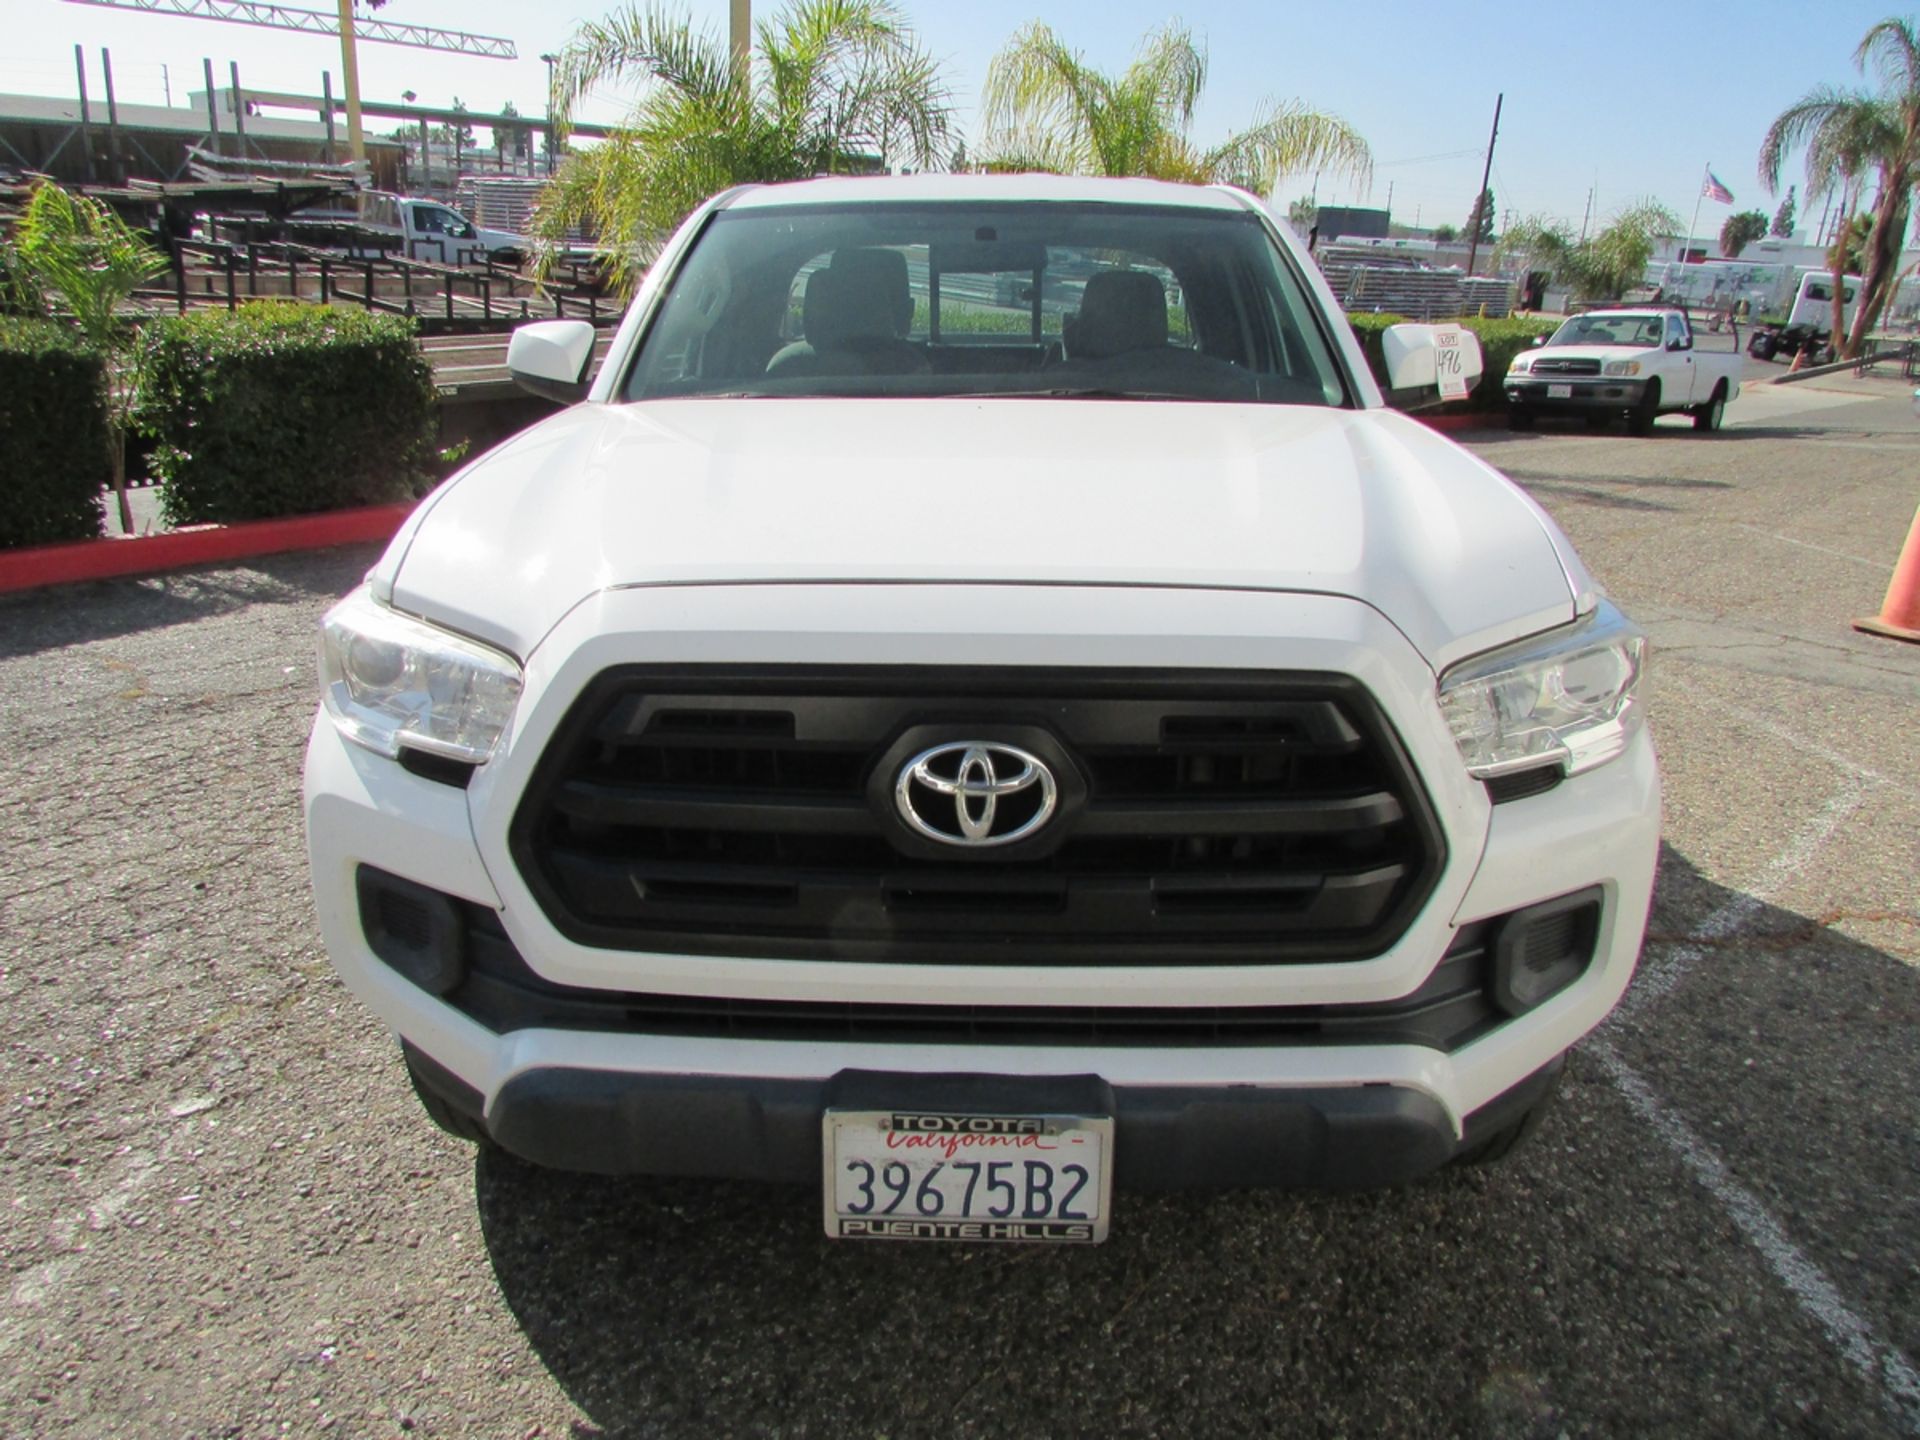 2016 TOYOTA TACOMA 2X4 EXTENDED CAB PICKUP TRUCK, 6' BED, 2.7L INLINE 4 CYLINDER ENGINE, AUTOMATIC - Image 10 of 19